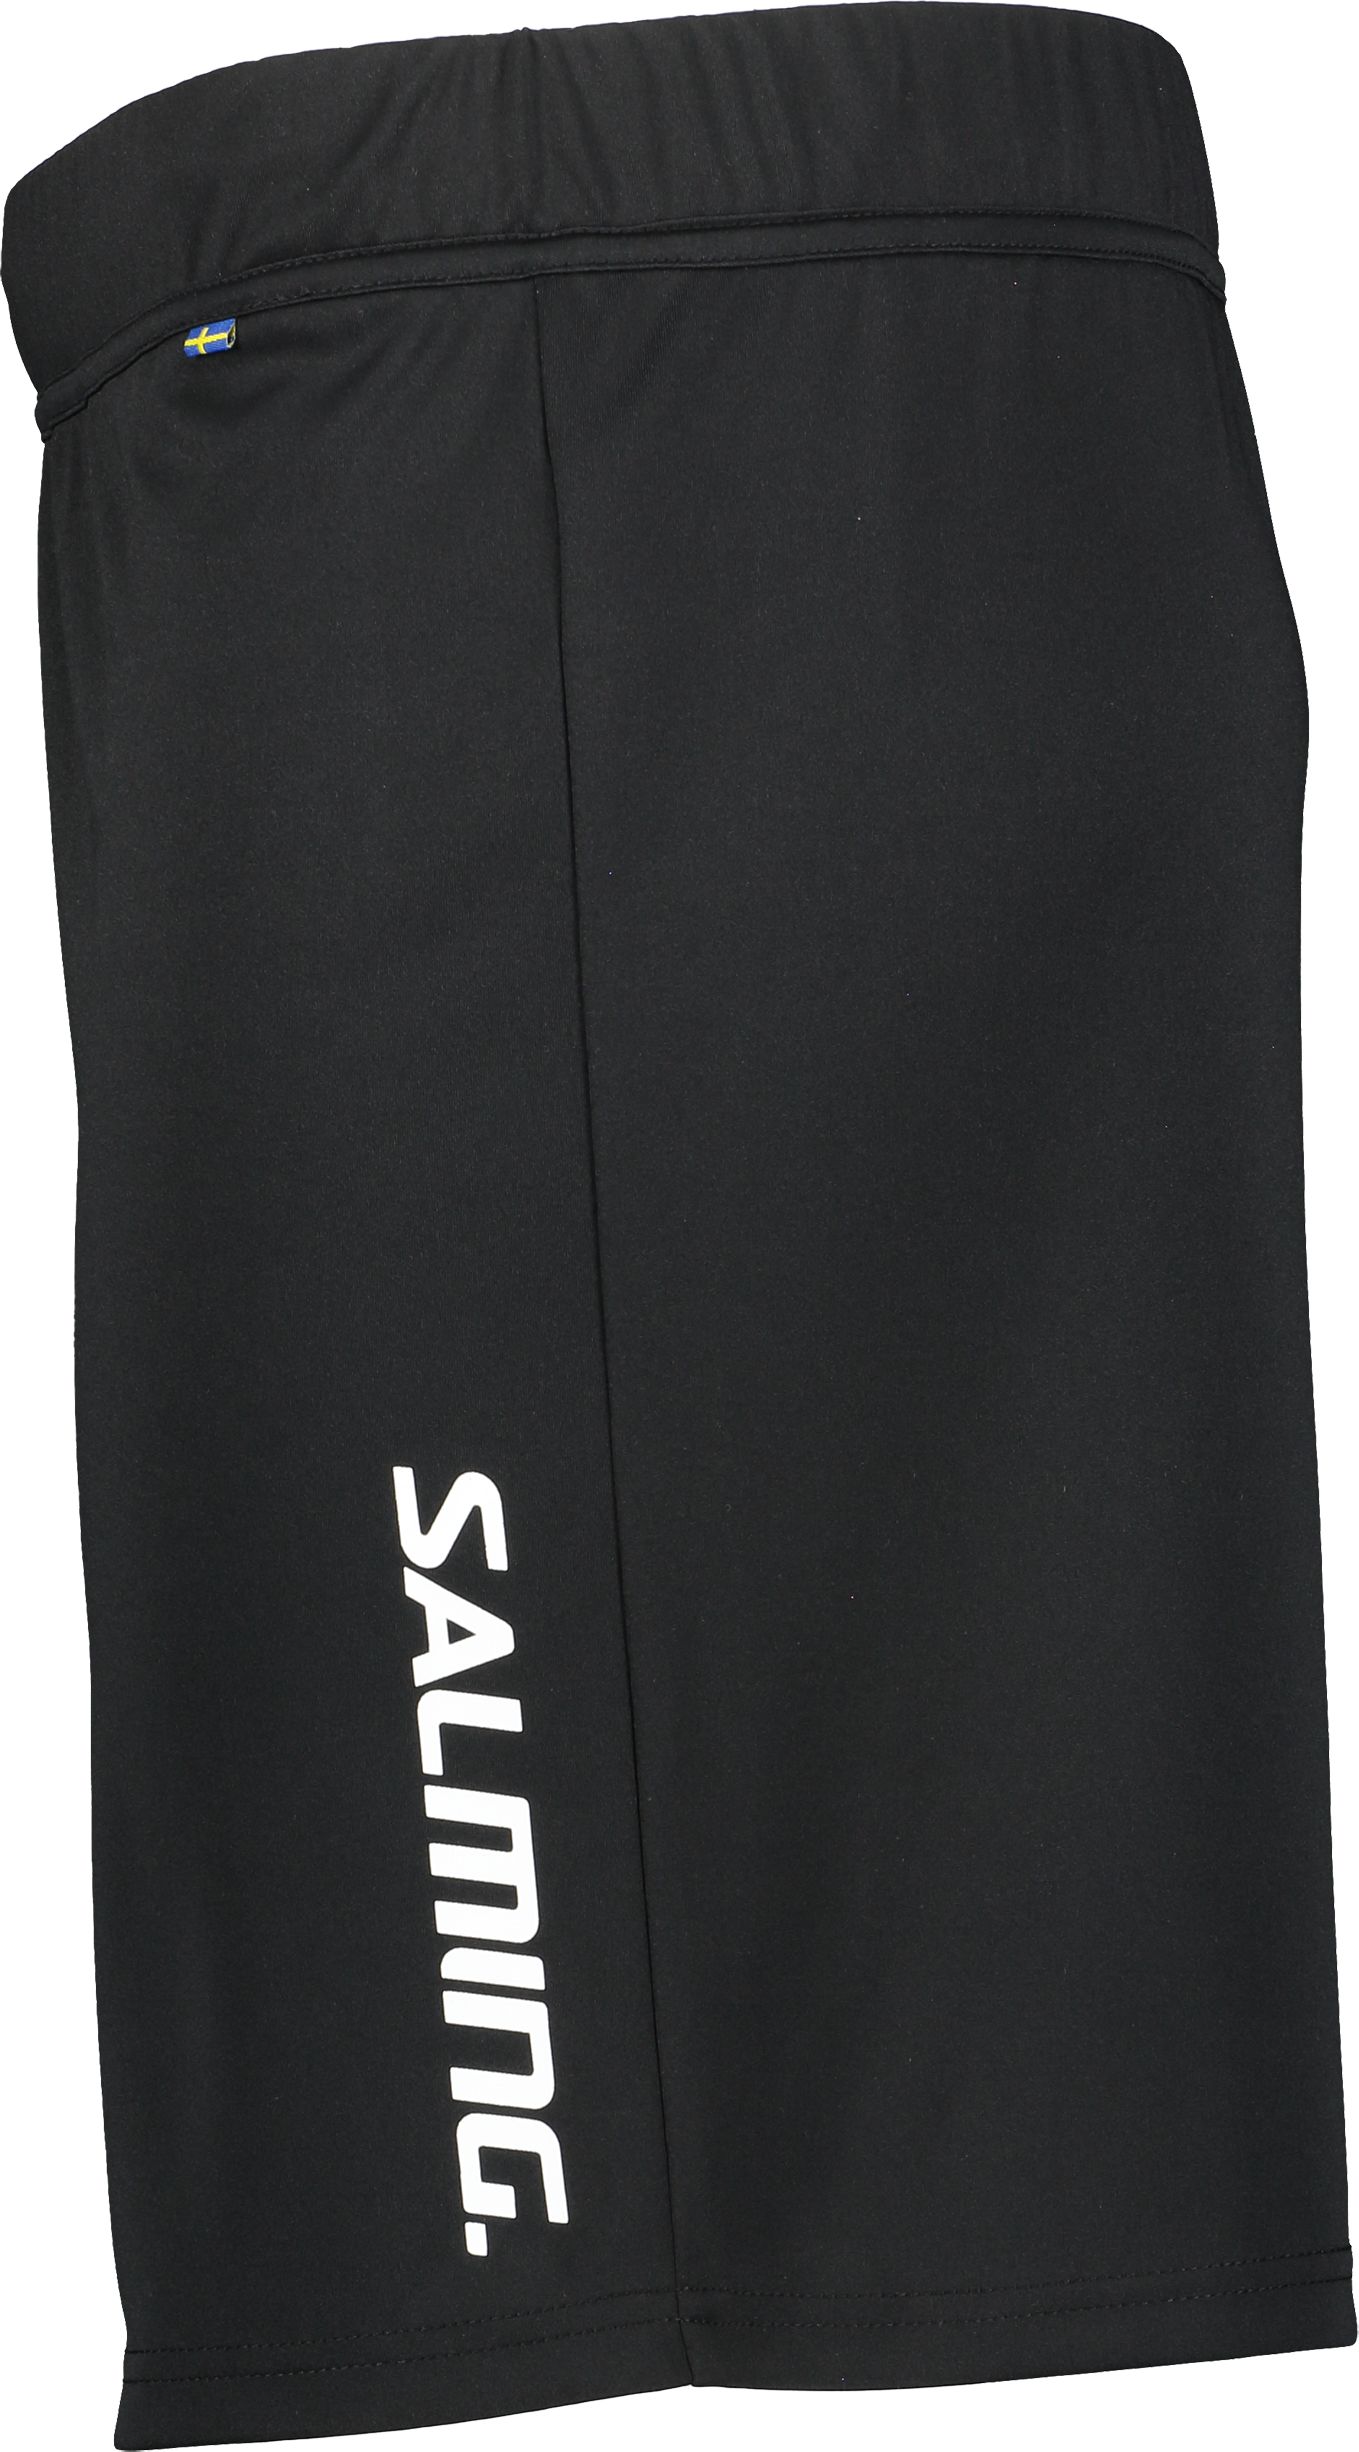 SALMING, CORE 22 TRG SHORTS